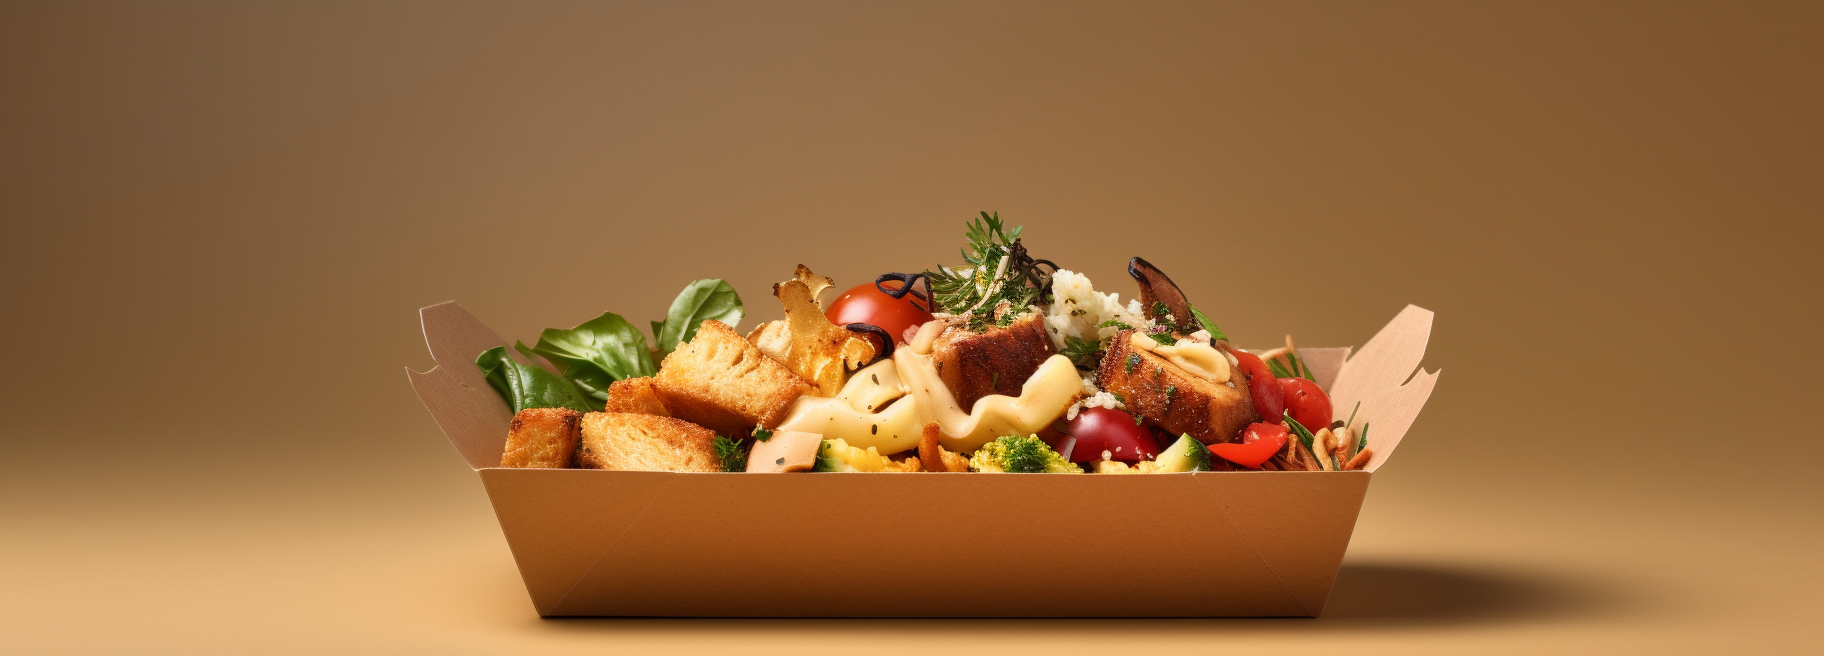 ys6853_kraft_food_takeout_container_with_food._61a61137-5a6b-4c57-8591-3de2d3194267.png